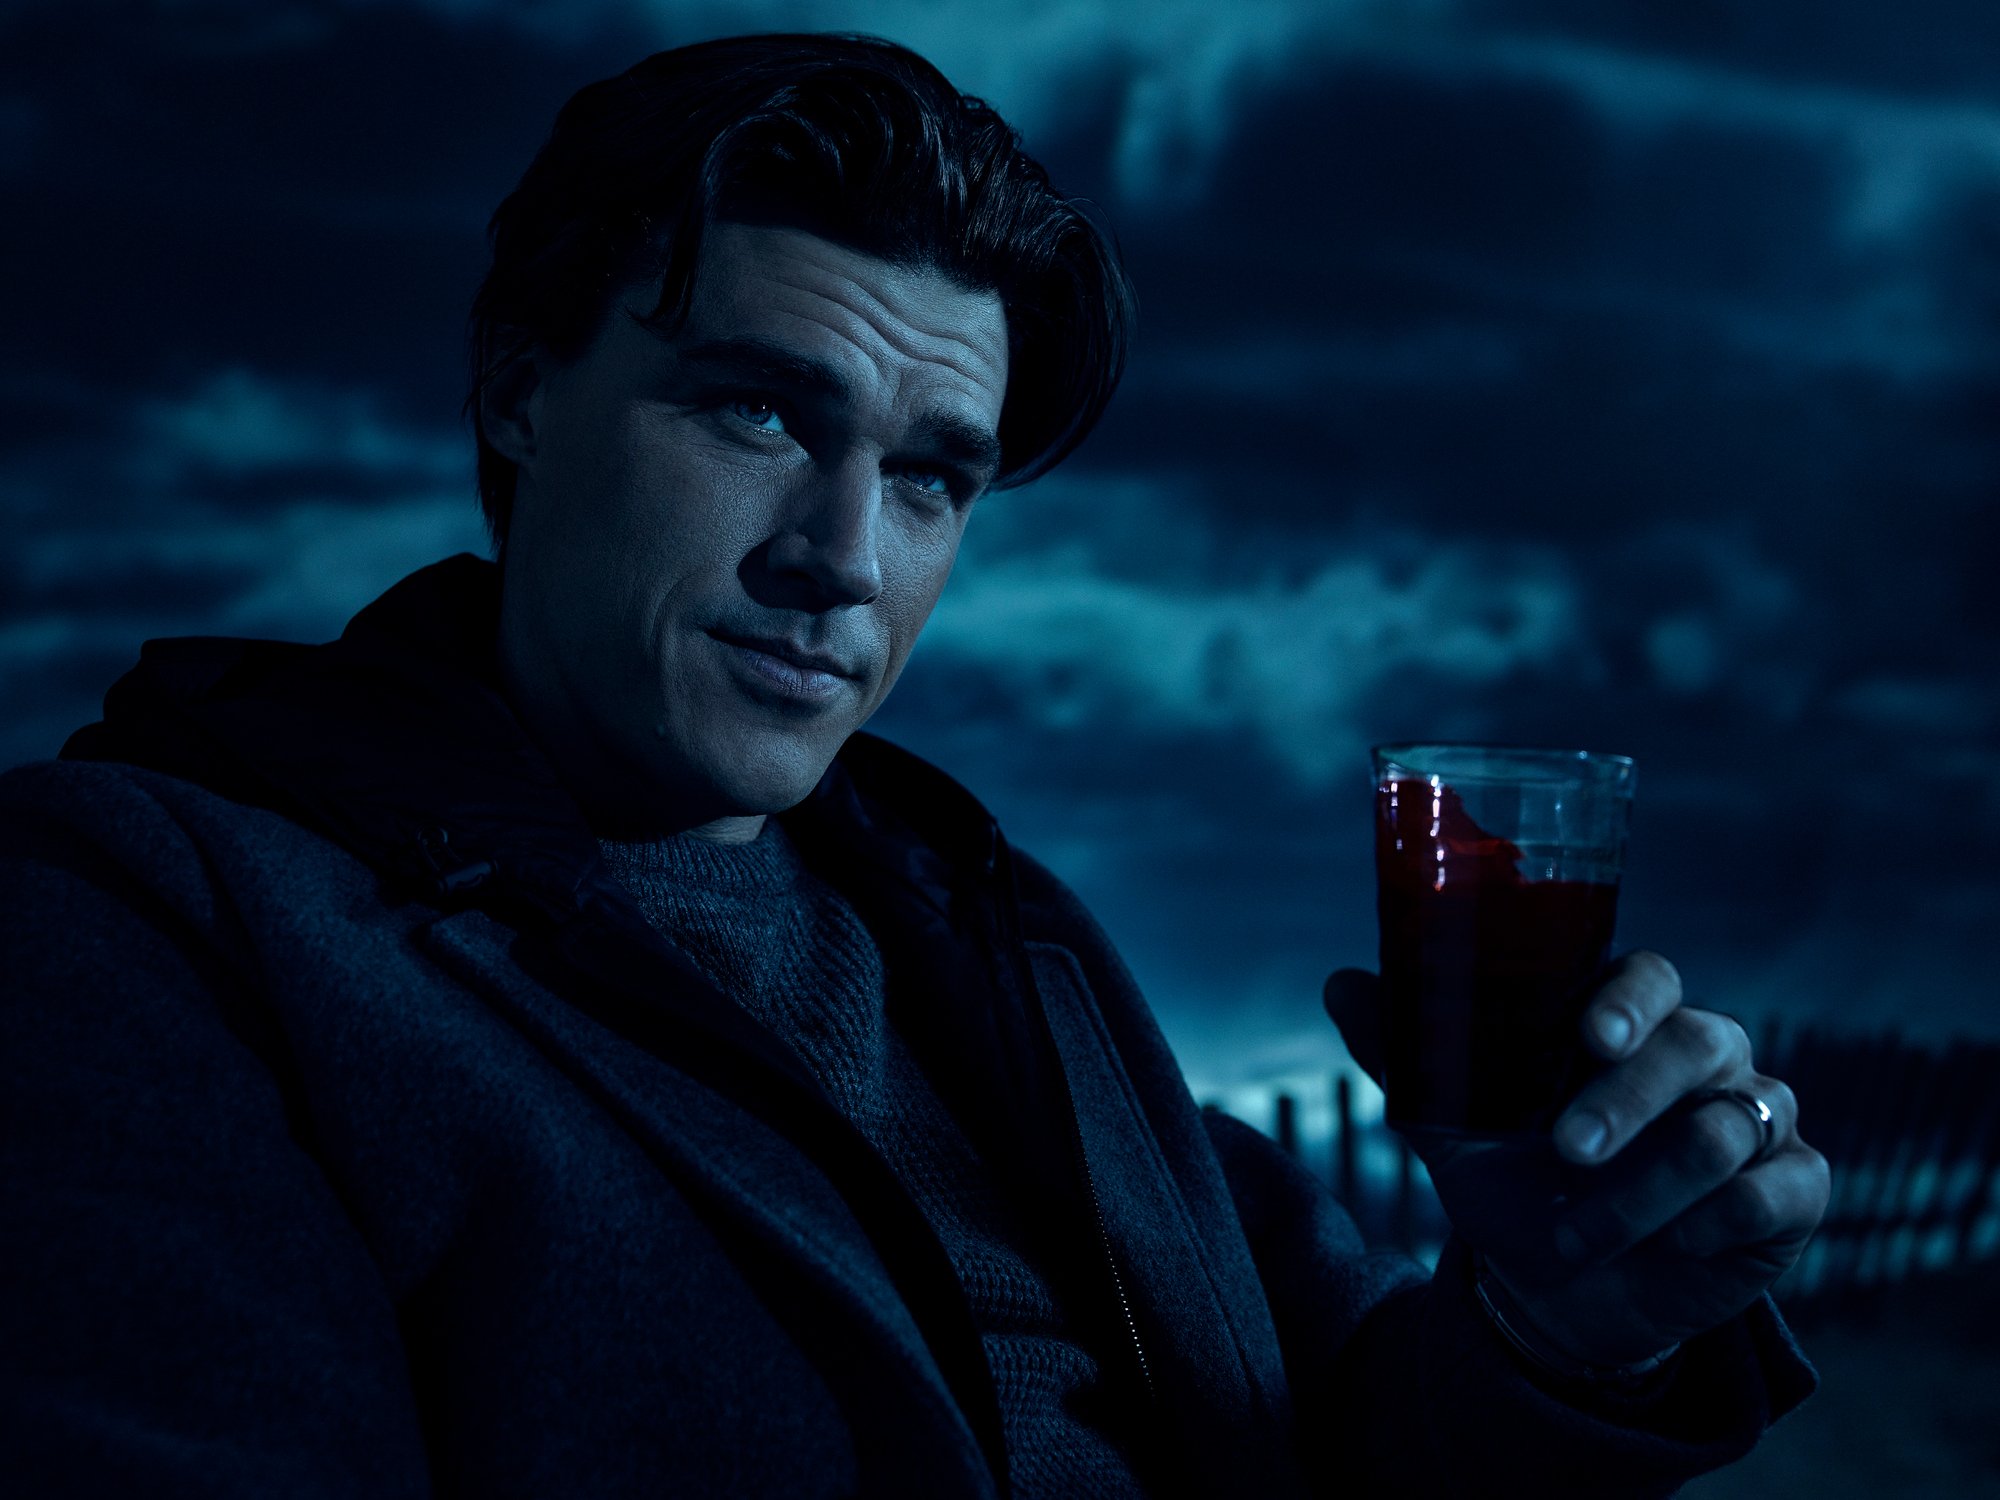 'American Horror Story' Season 10 image shows Finn Wittrock wearing a dark sweater and coat and holding a cup of blood. He looks like he's lounging and a cloudy sky is behind him.